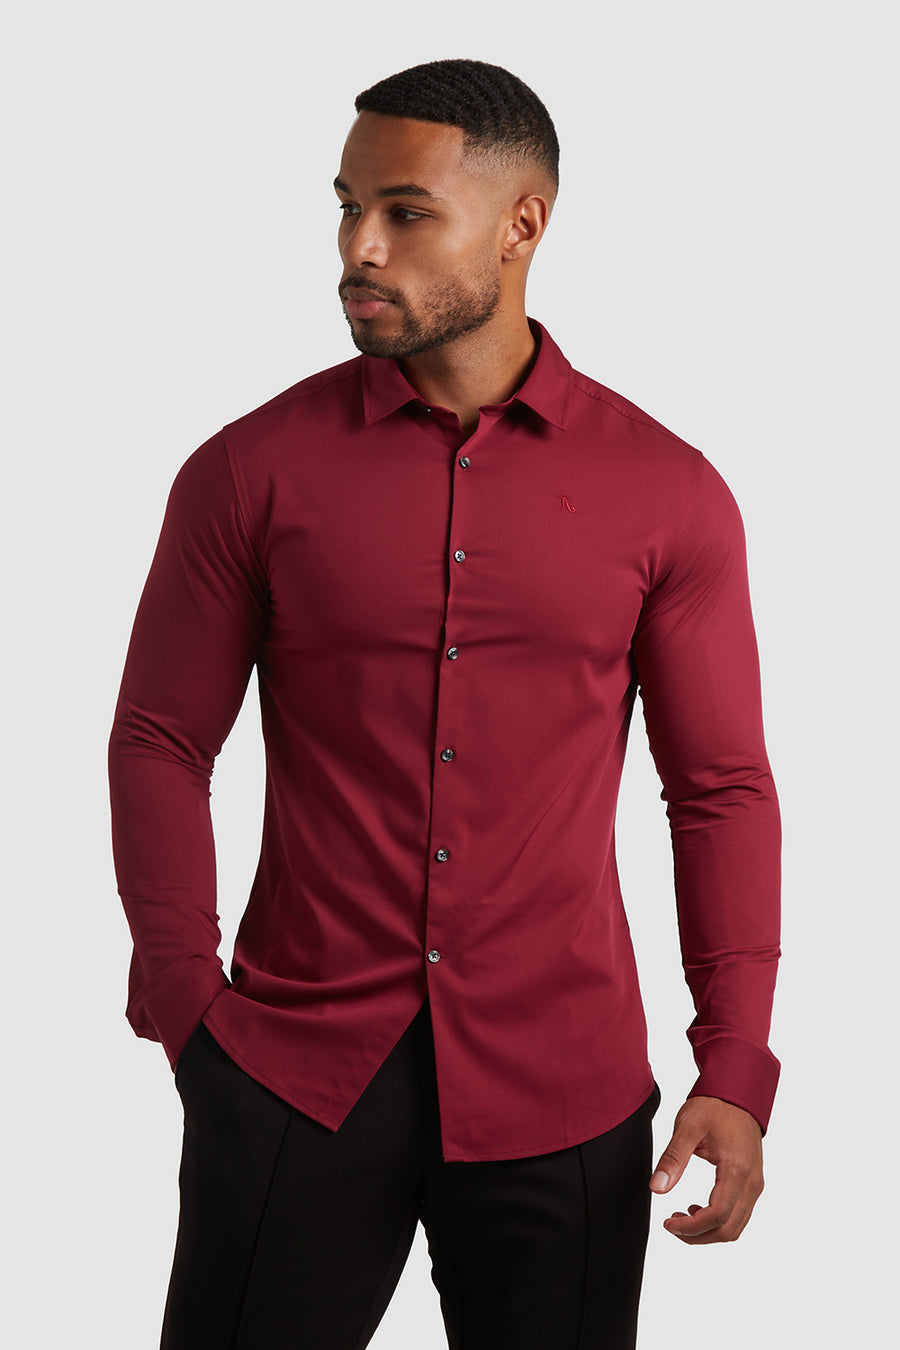 Bamboo Shirt in Claret - TAILORED ATHLETE - USA